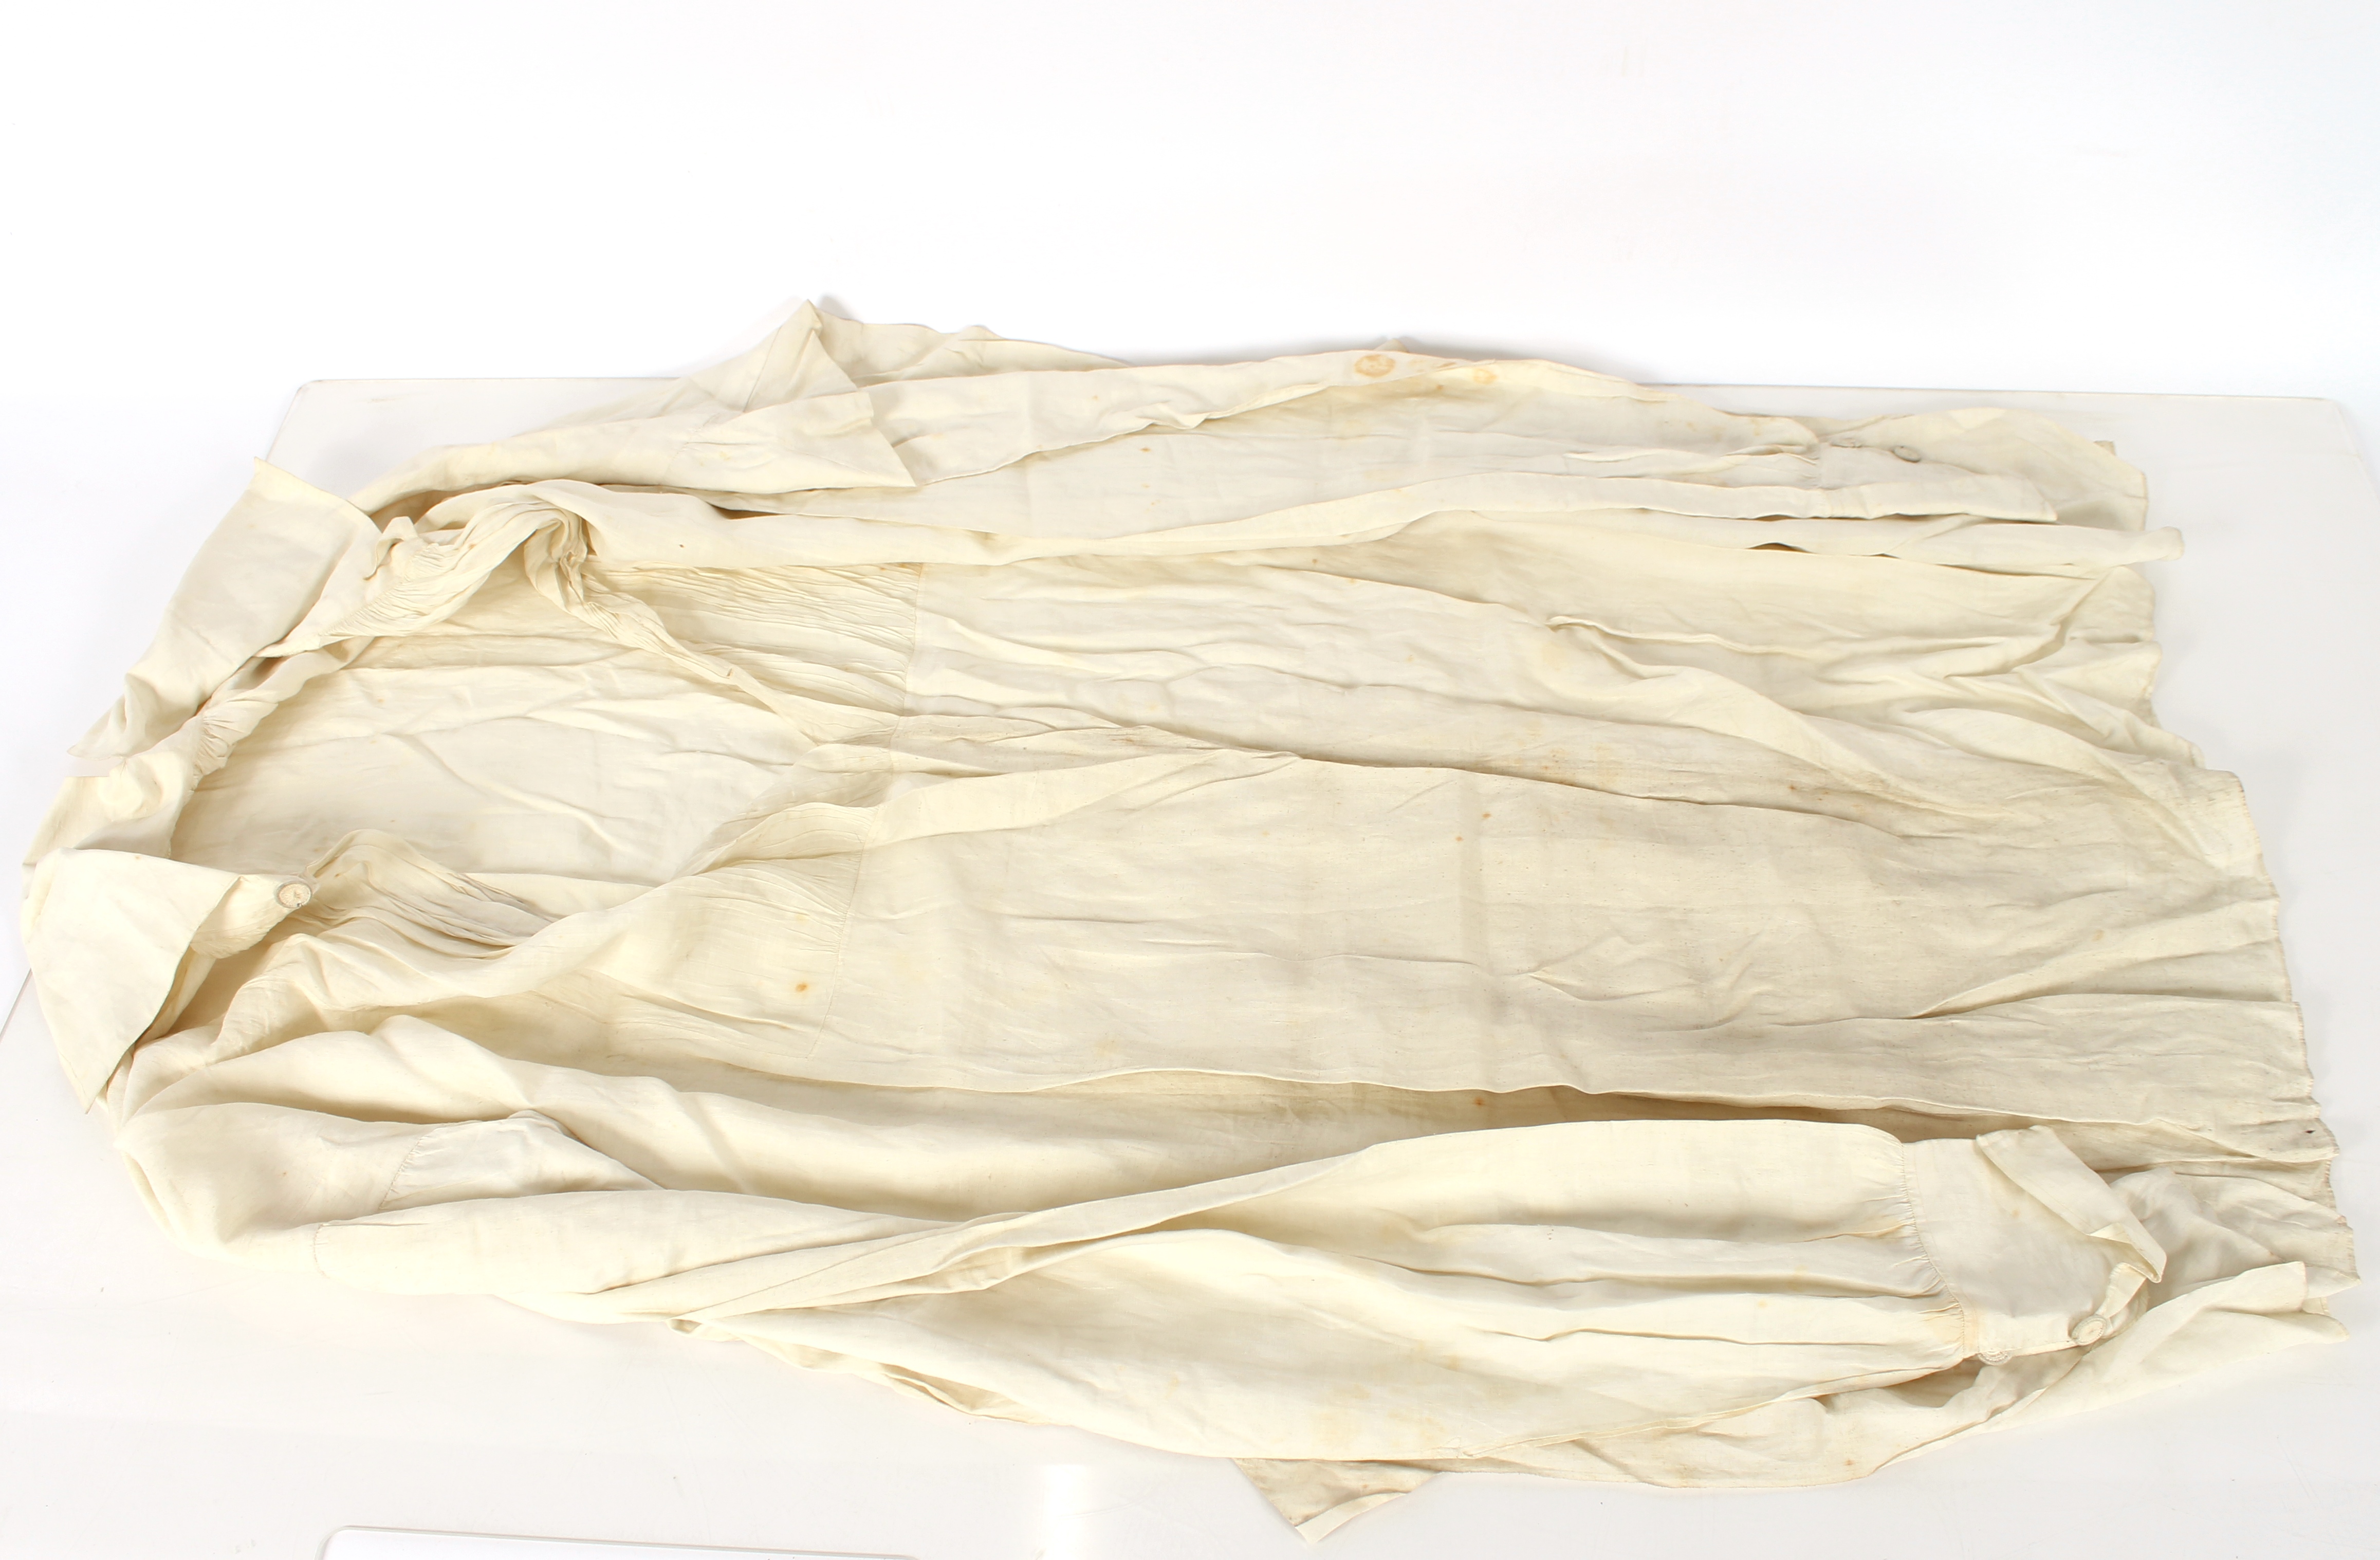 A linen shirt with attached label stating "A George IV shirt when Prince of Wales"; other lace